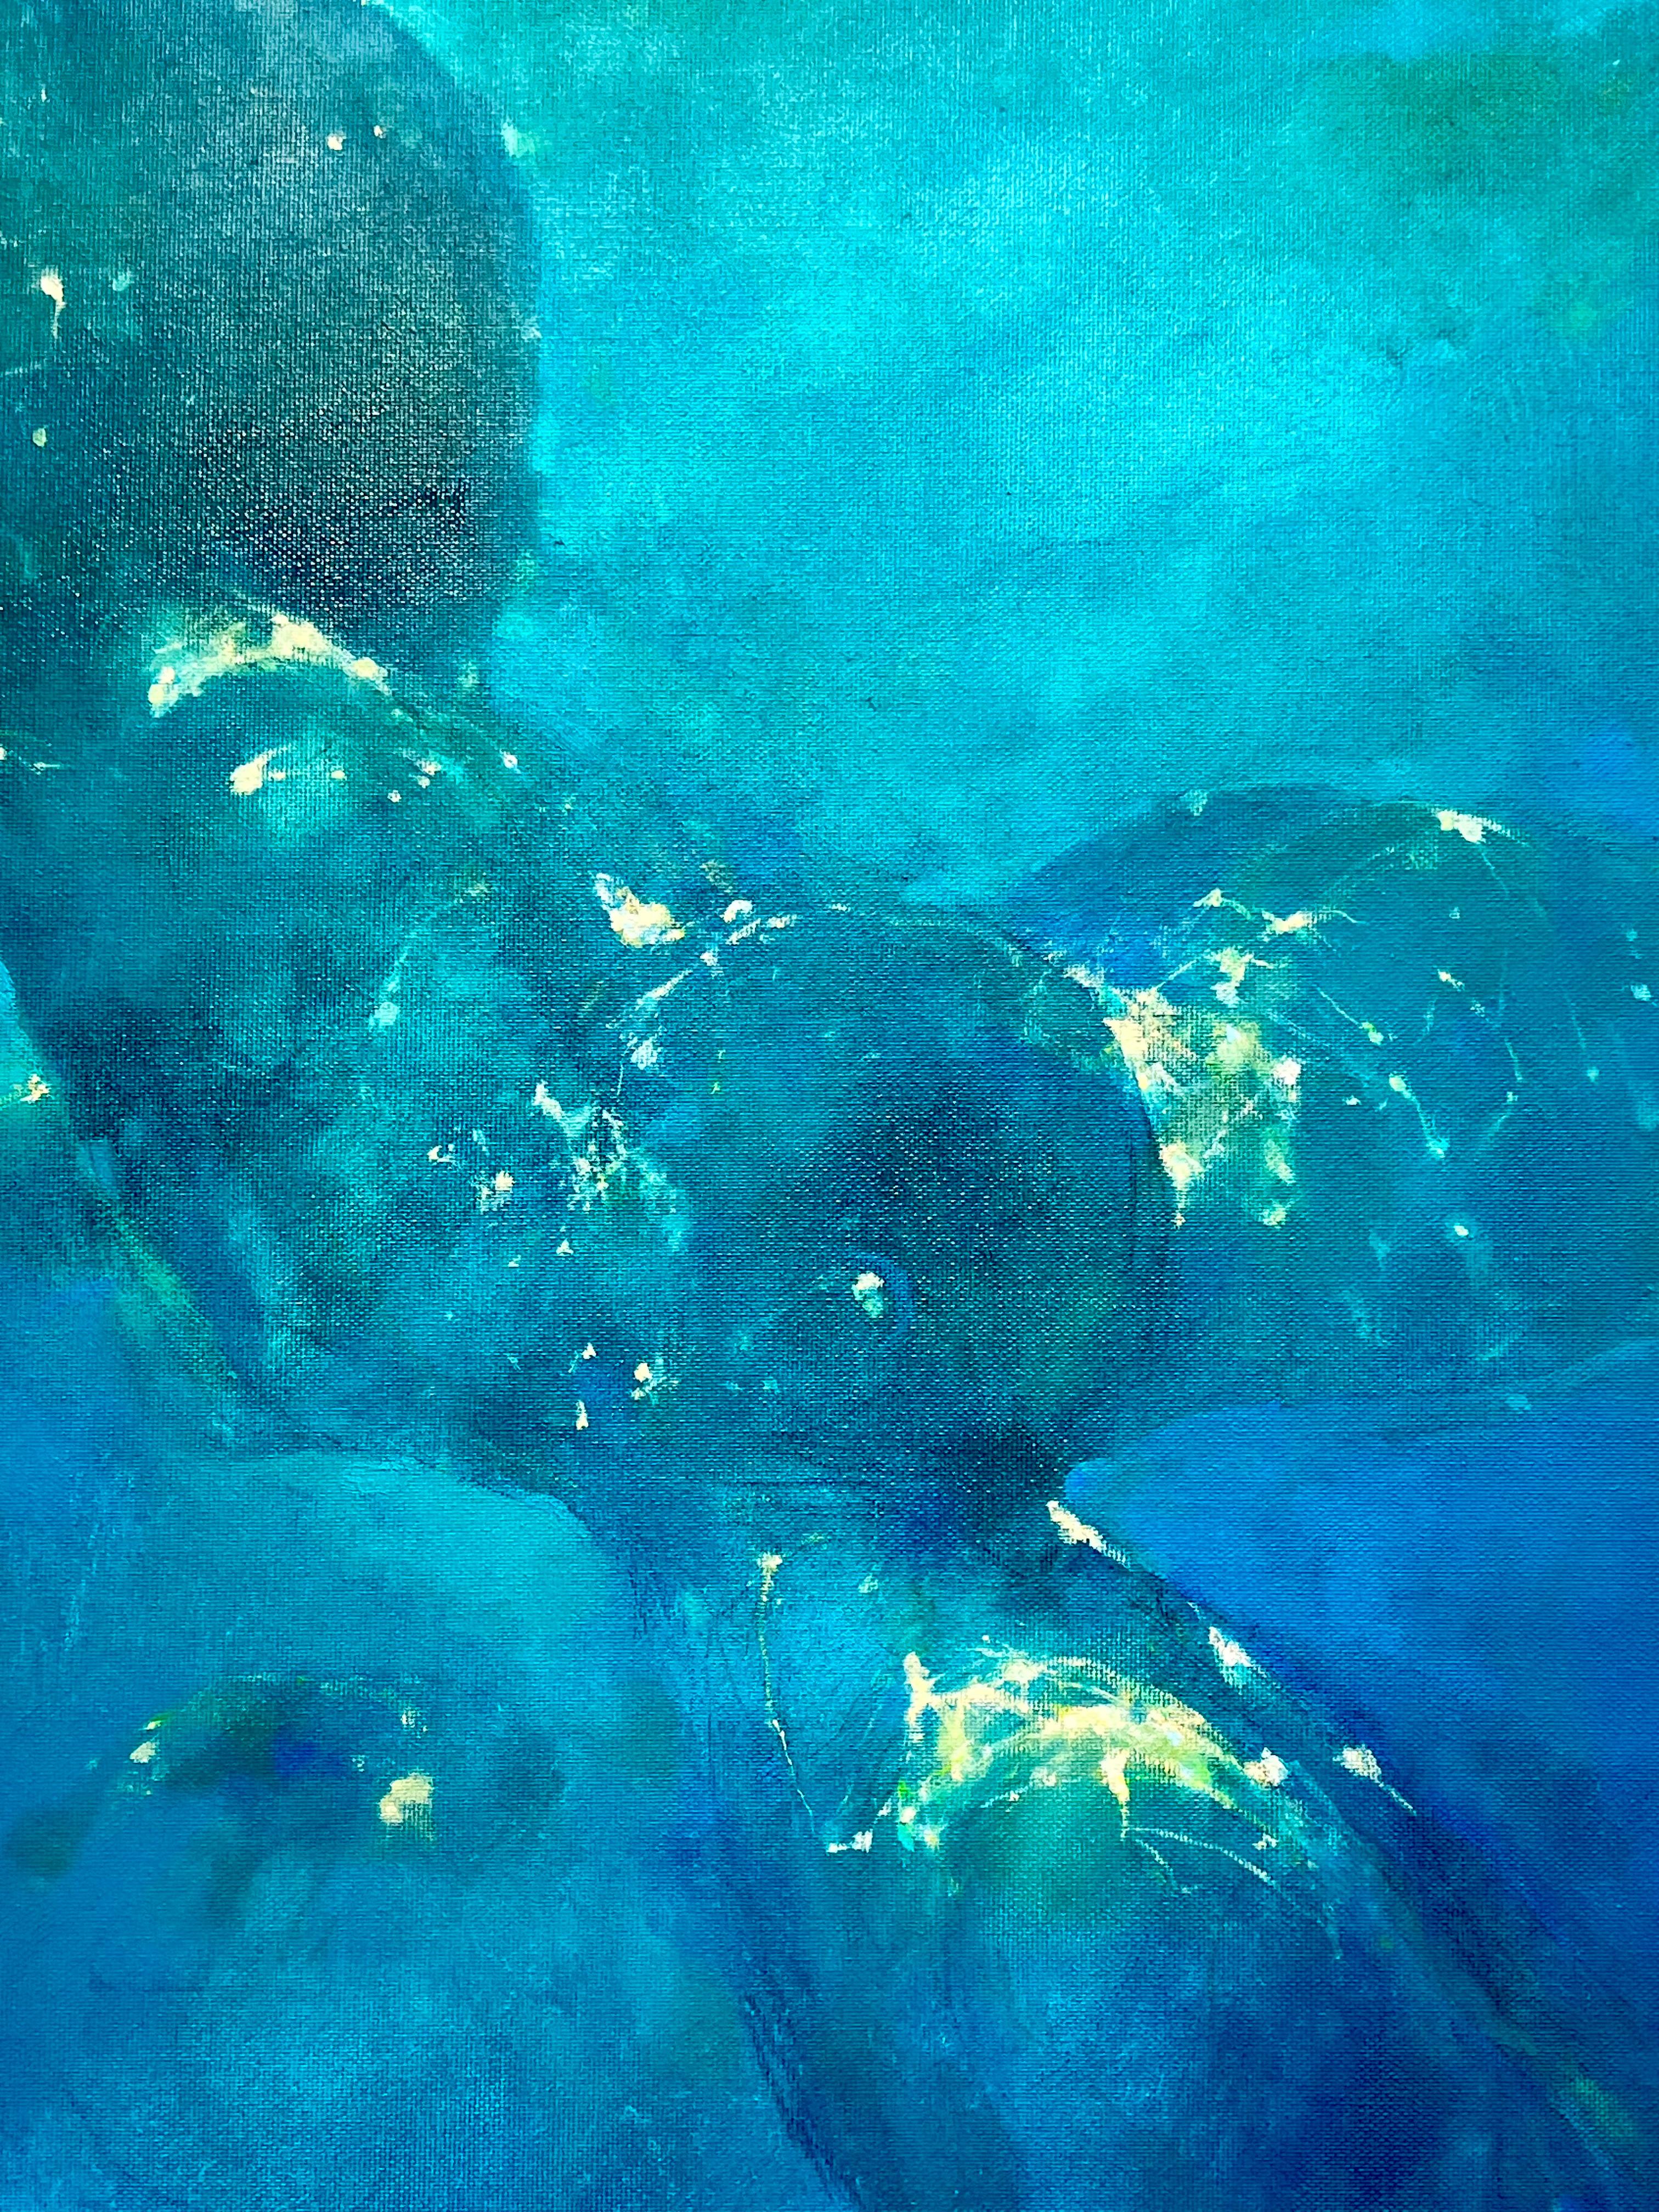 Emerald World - modern art, abstract human figurative expression painting - Blue Landscape Painting by Bill Bate